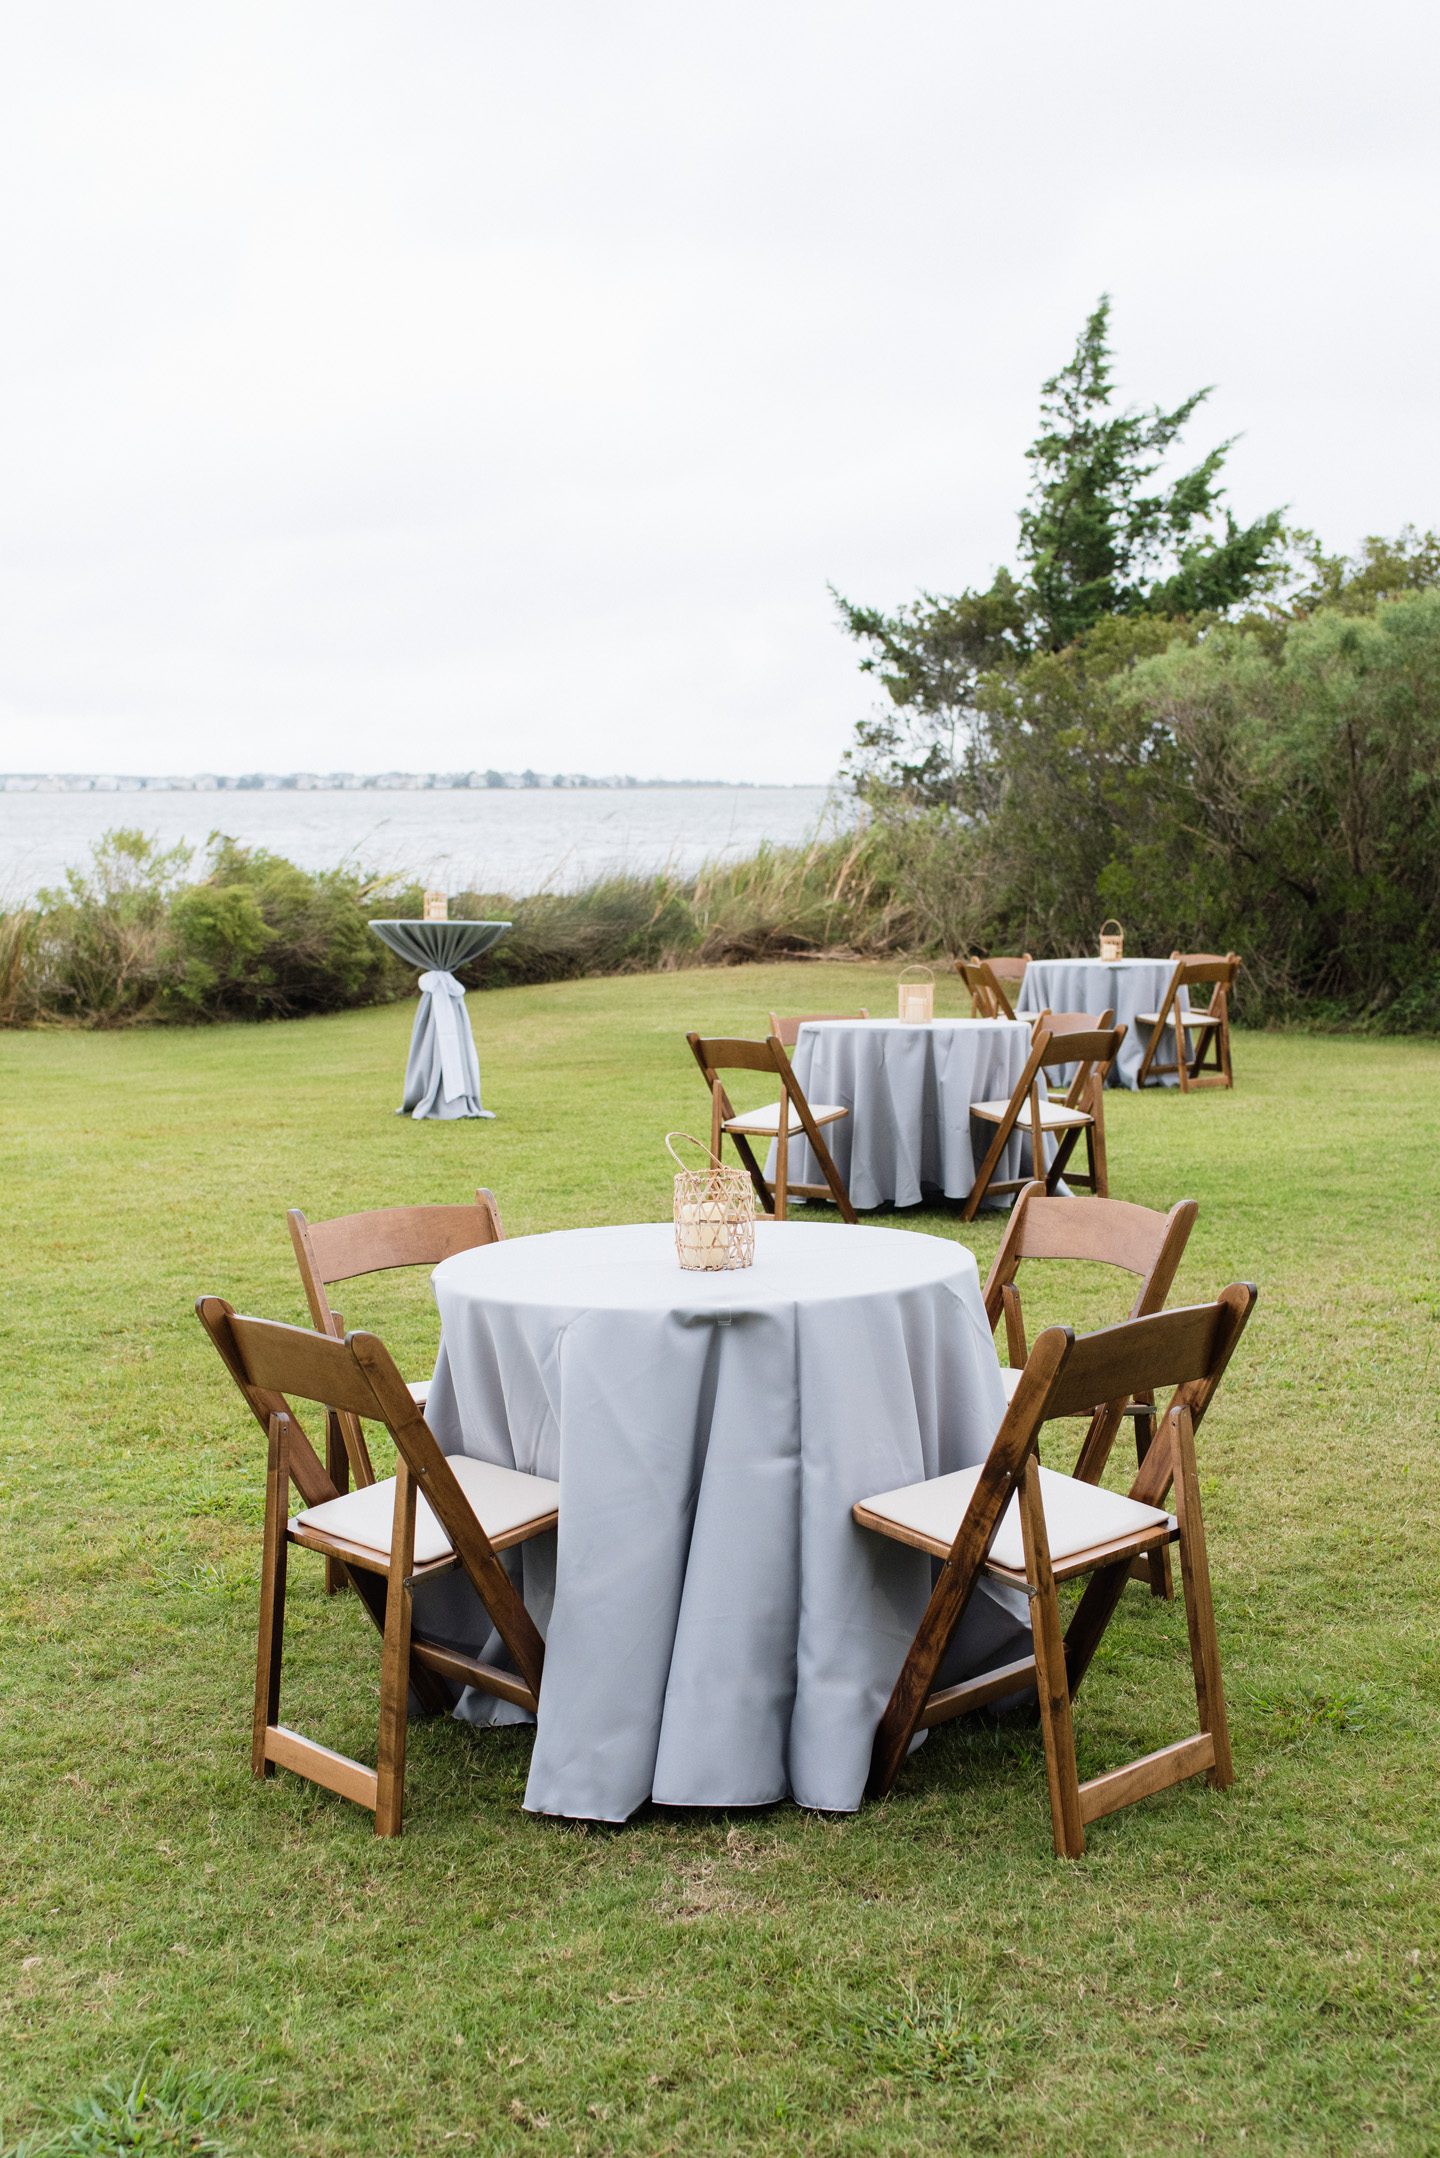 Wedding cocktail hour at Festival Park in Manteo